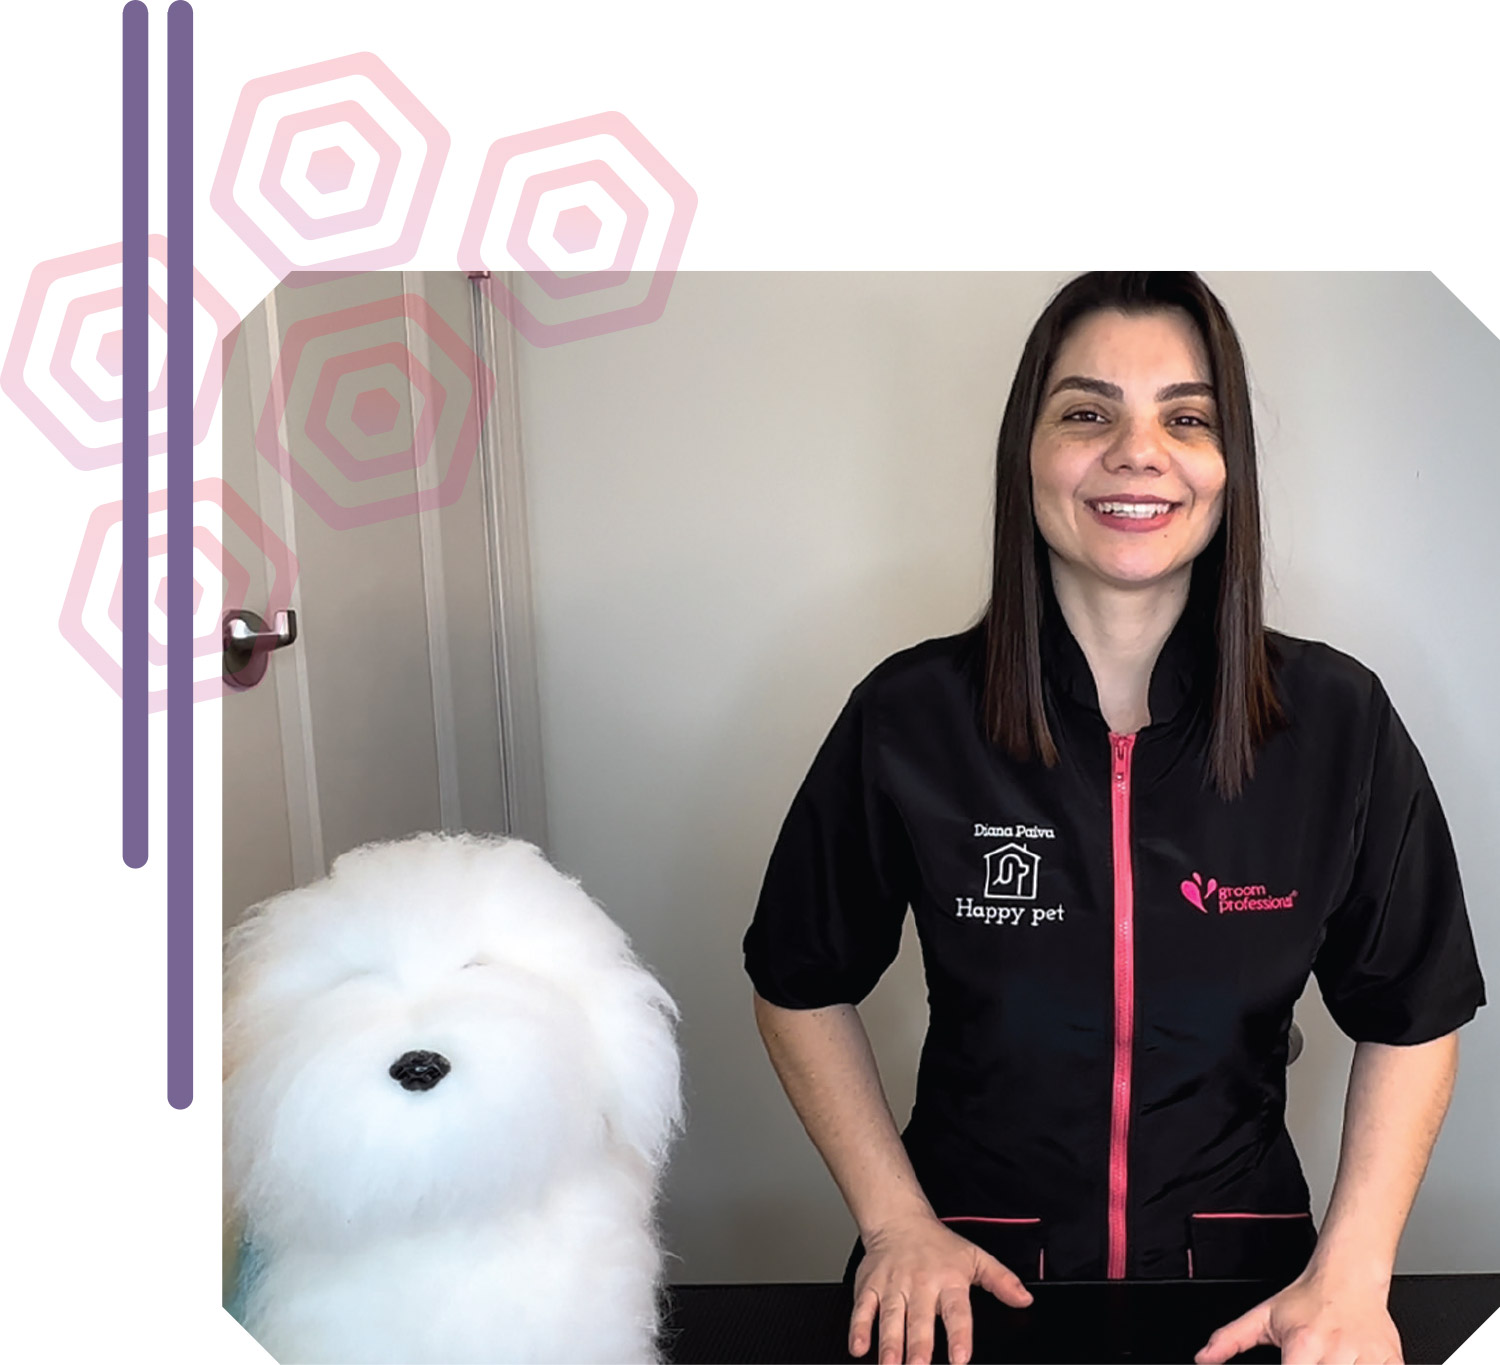 Diana Paiva smiles wearing her groomer's uniform in a snapshot from one of her training videos